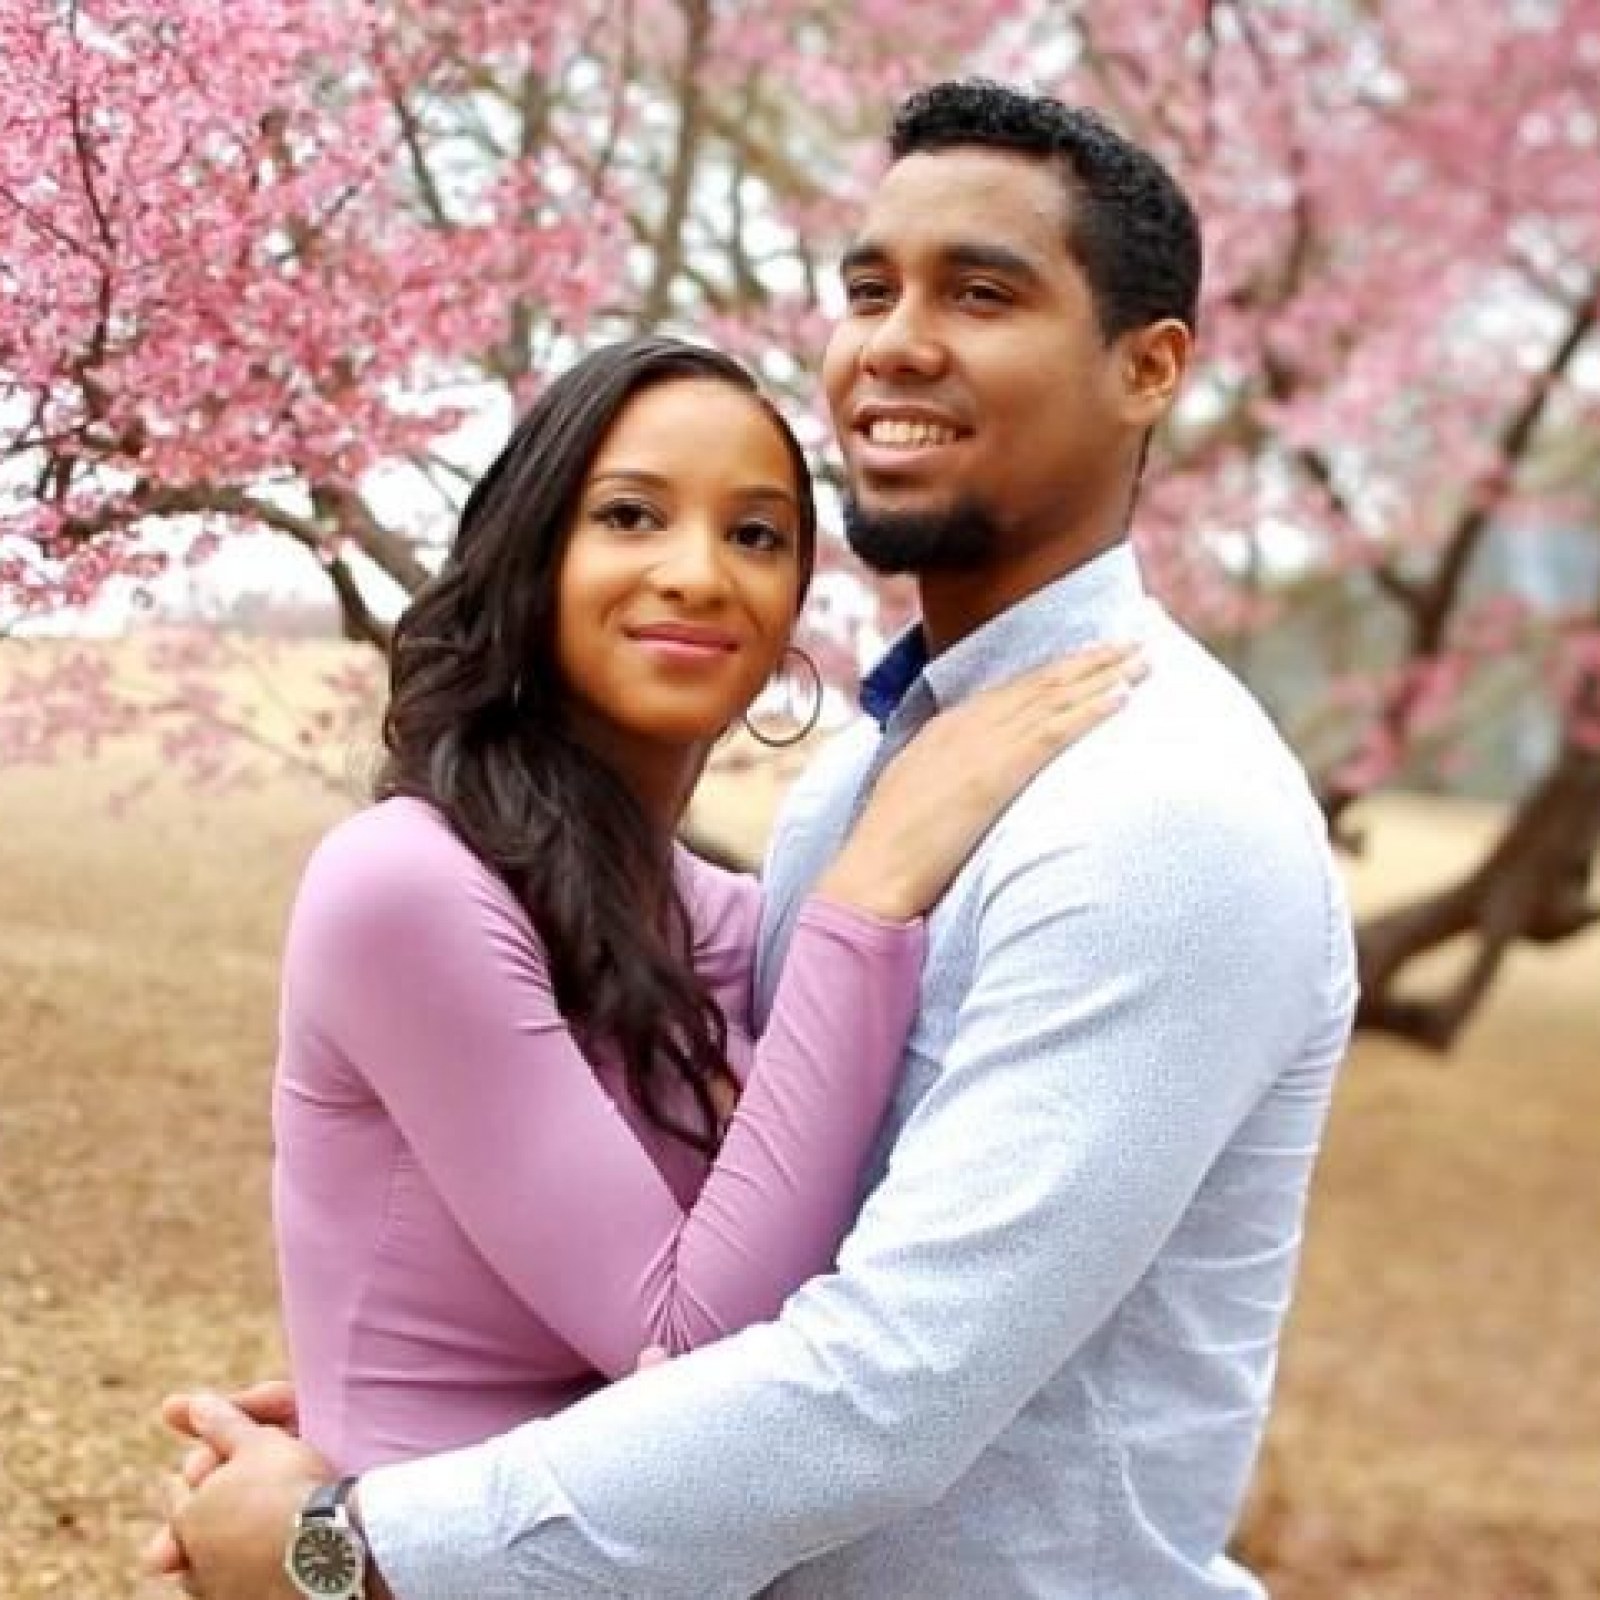 '90 Day Fiancé' Colt’s fight with Larissa - The feud with Chantel and Pedro 